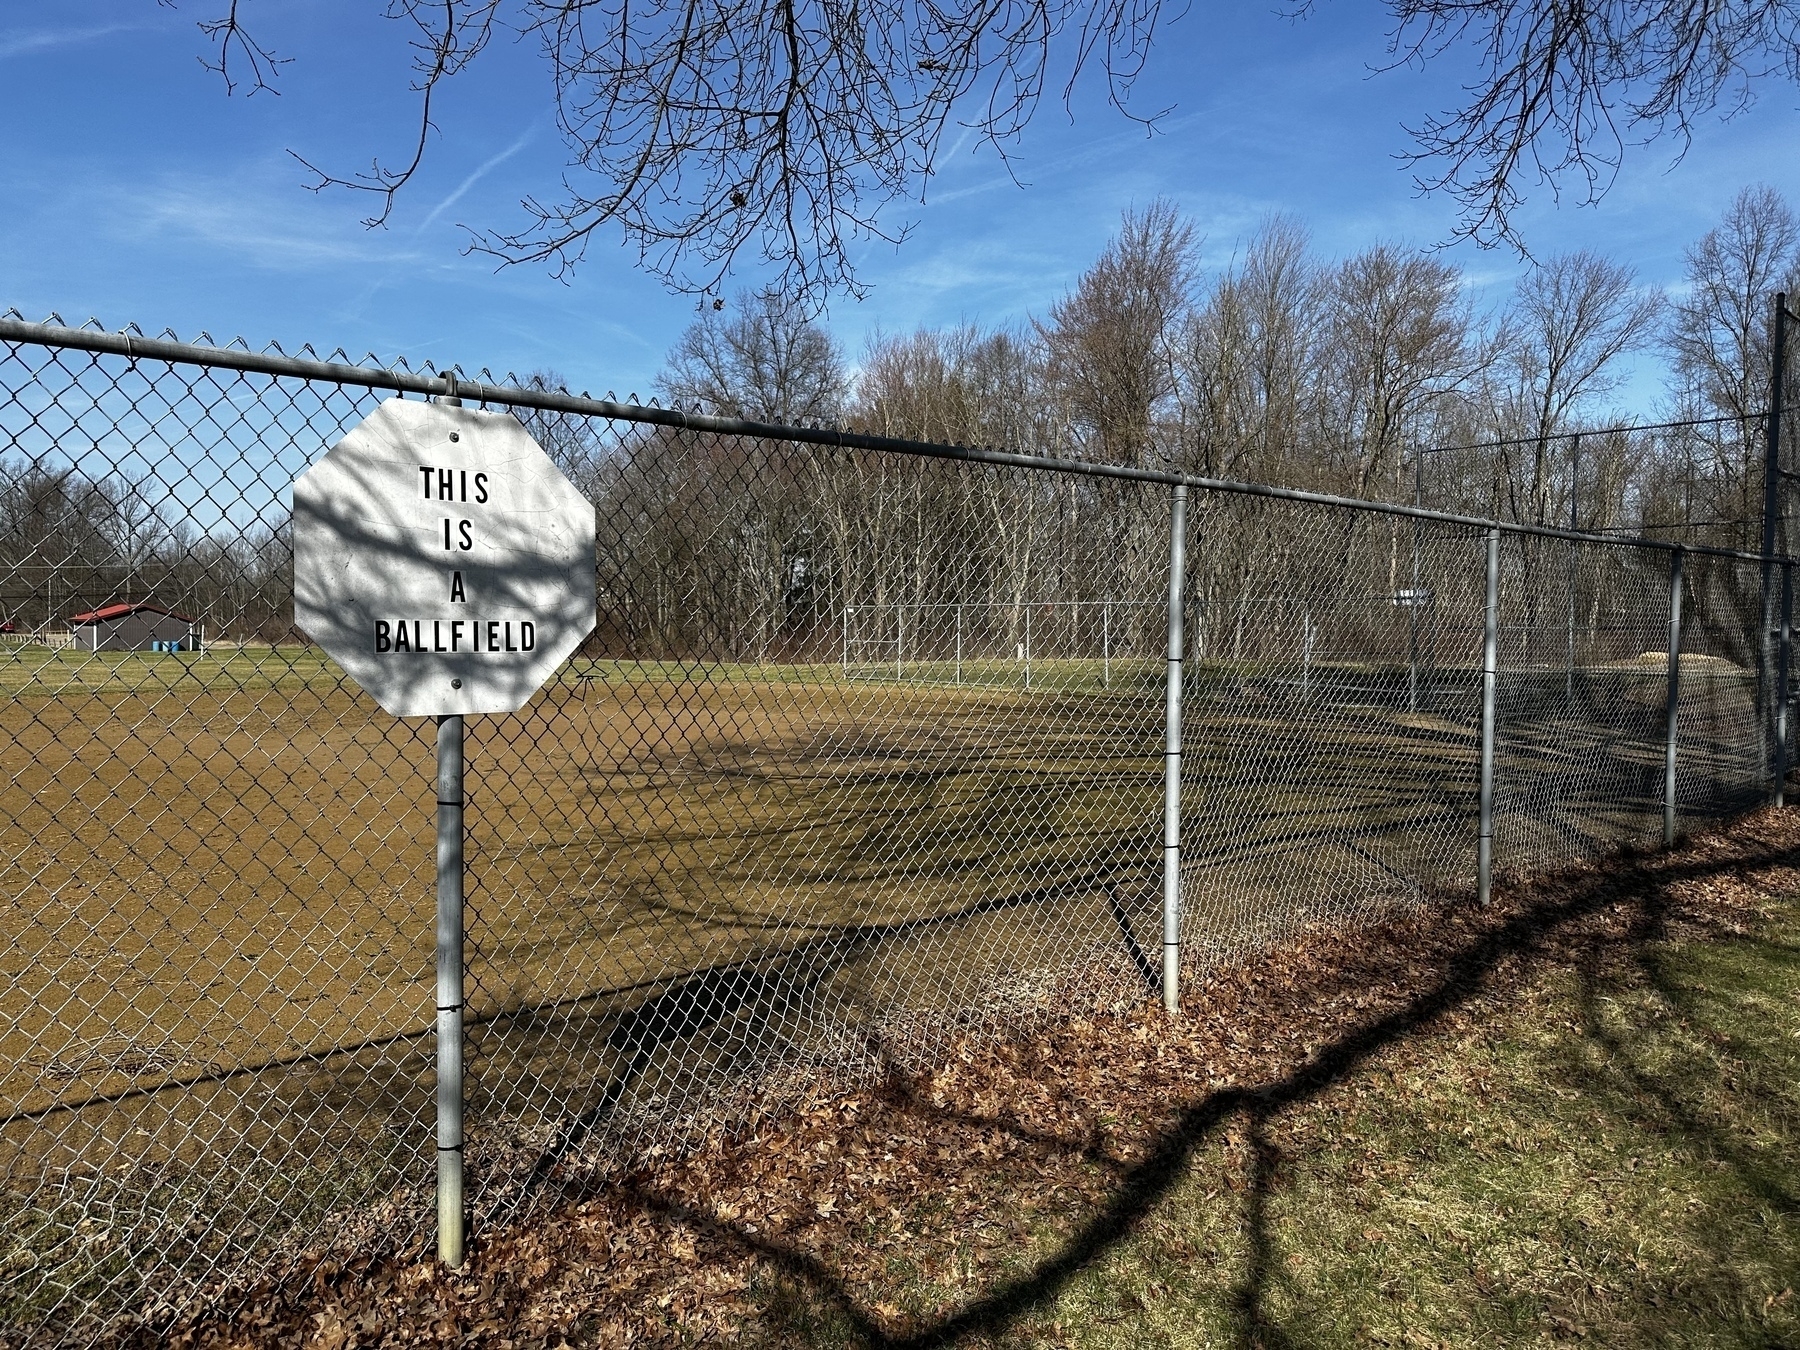 A sign reads "THIS IS A BALLFIELD". It is attached to a chain link fence surrounding a baseball field in a park. 